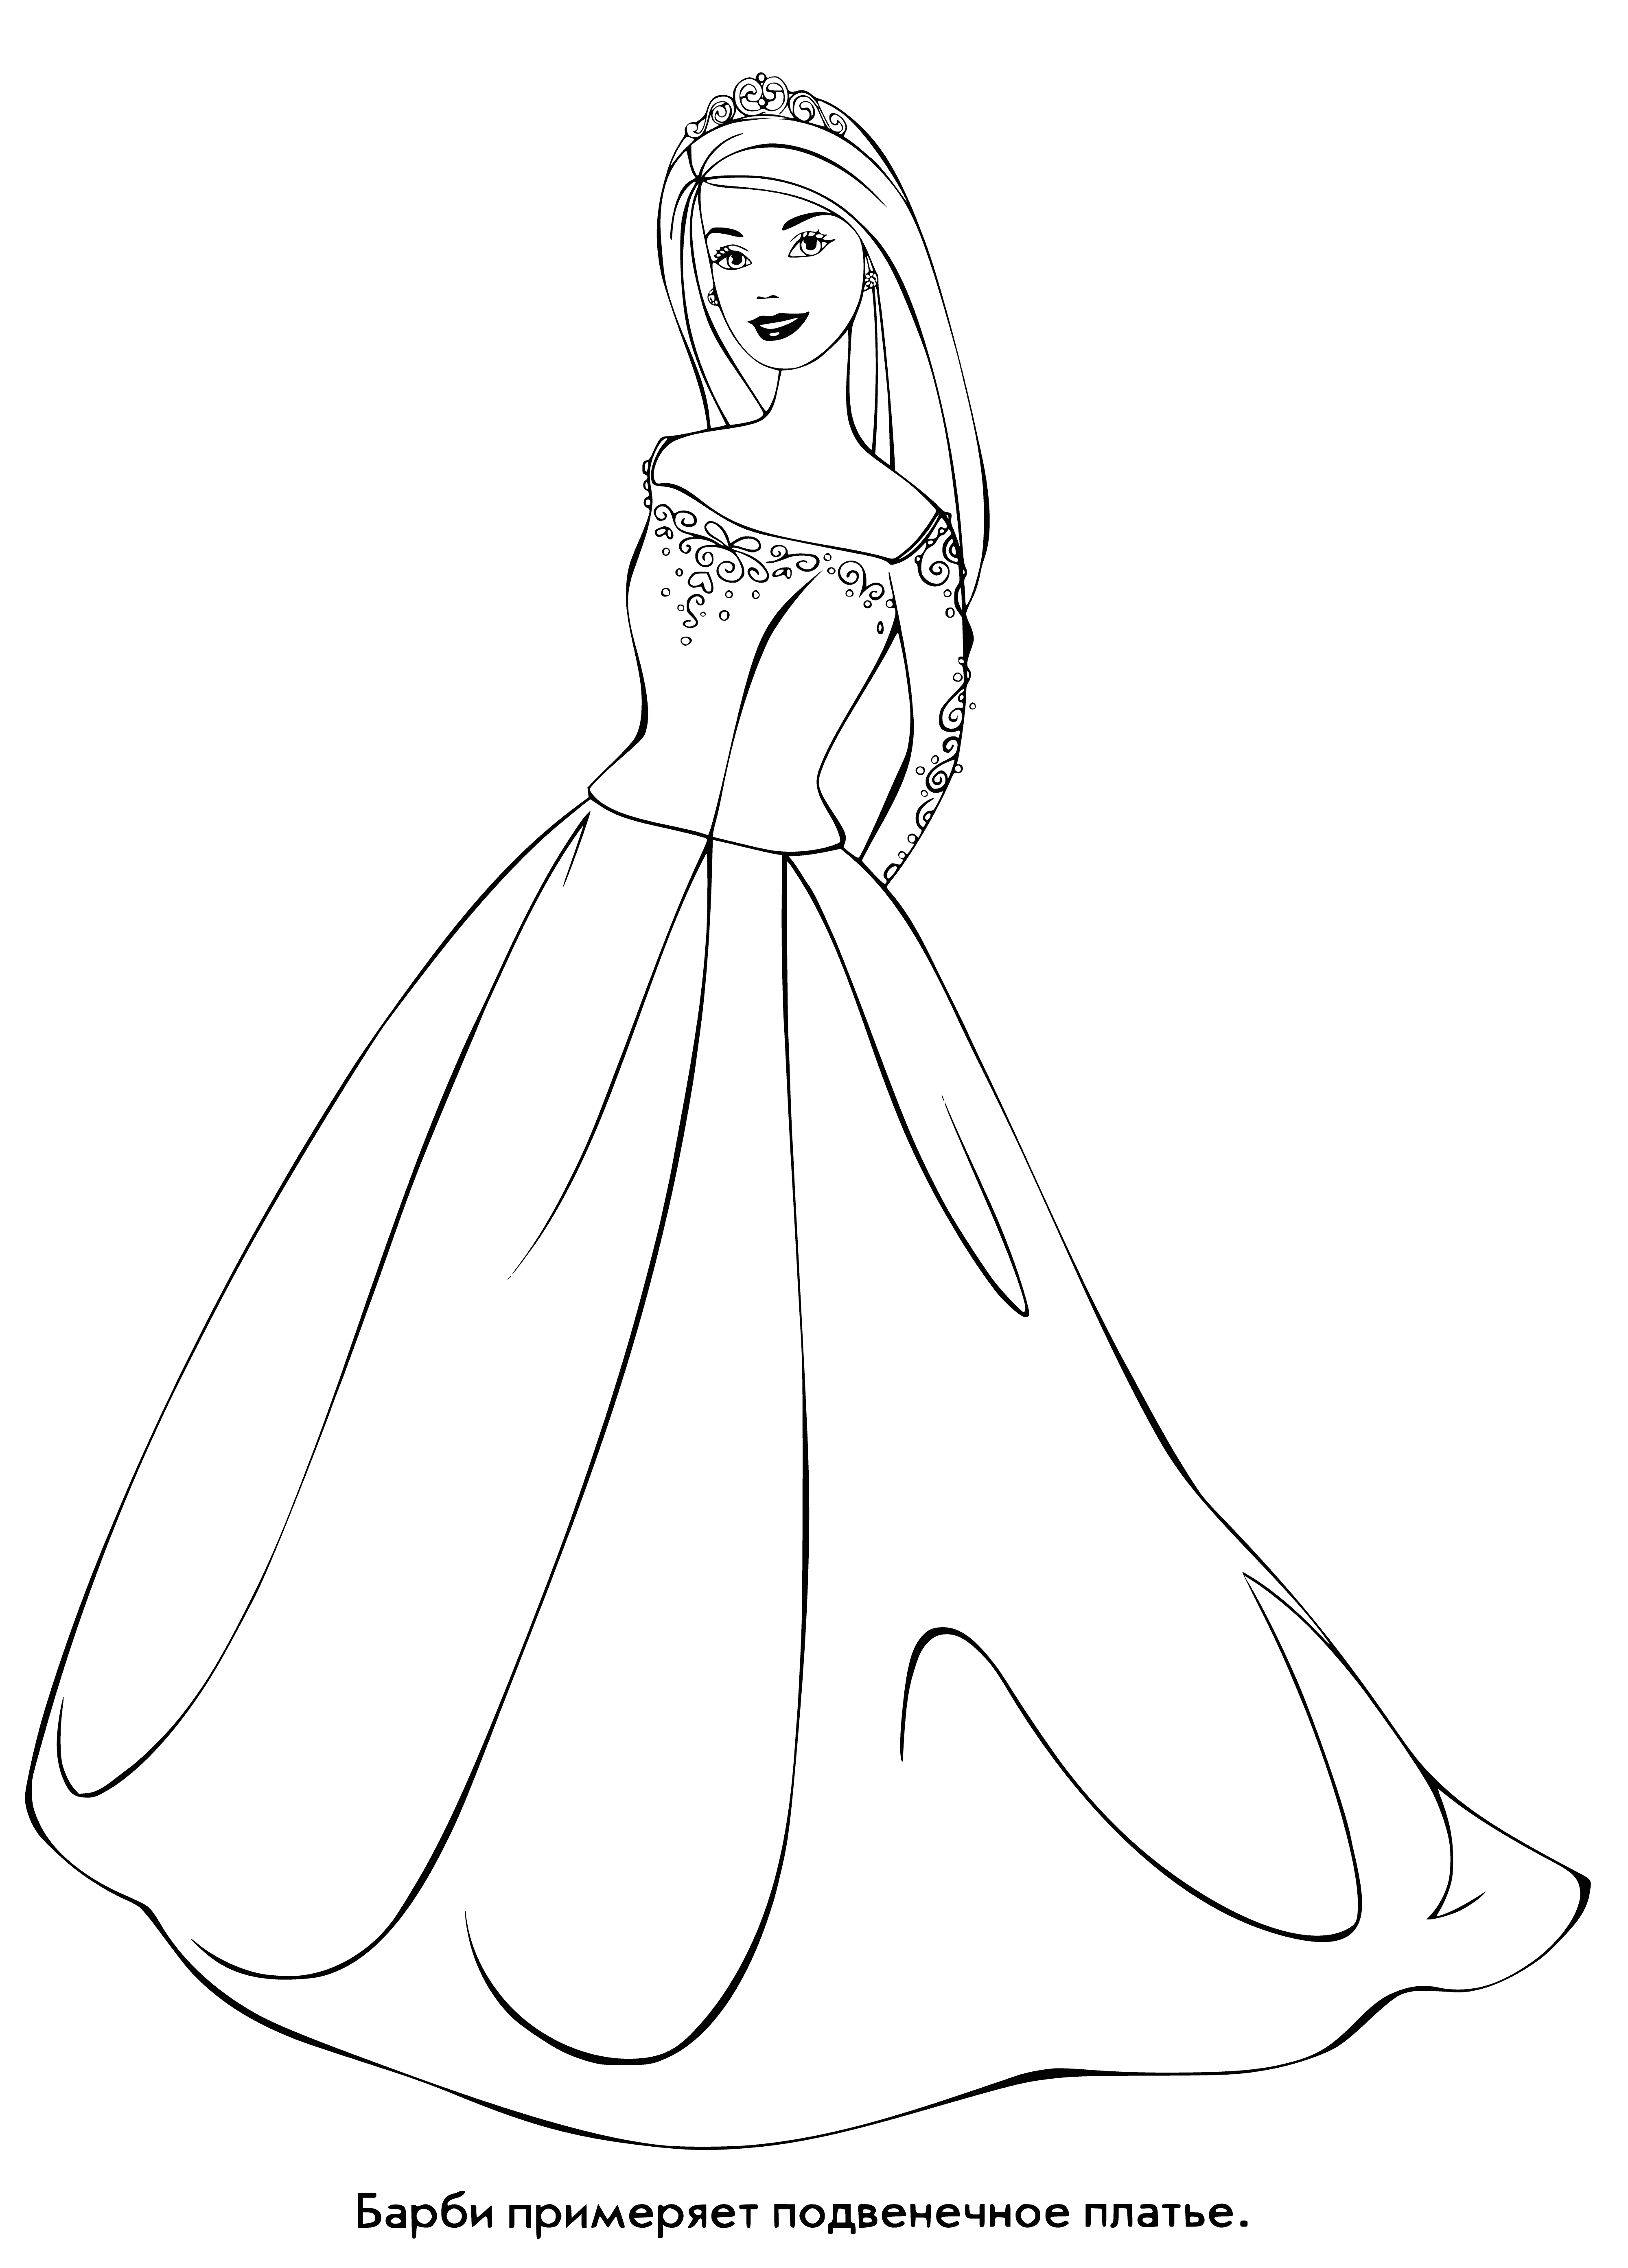 Barbie in a wedding dress coloring page